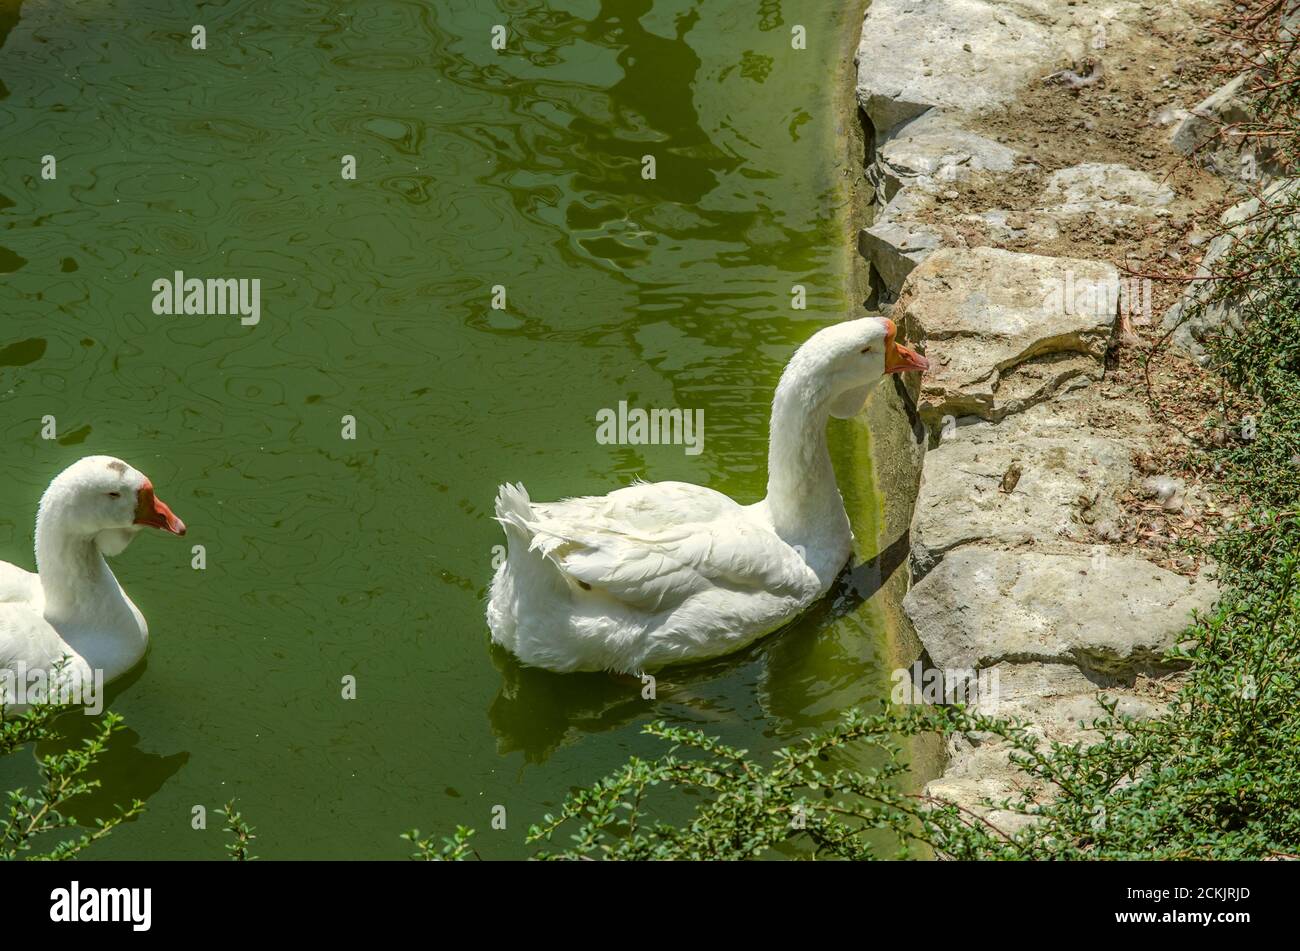 A pair of white geese swim in a pond near the shore lined with rough stones. Stock Photo